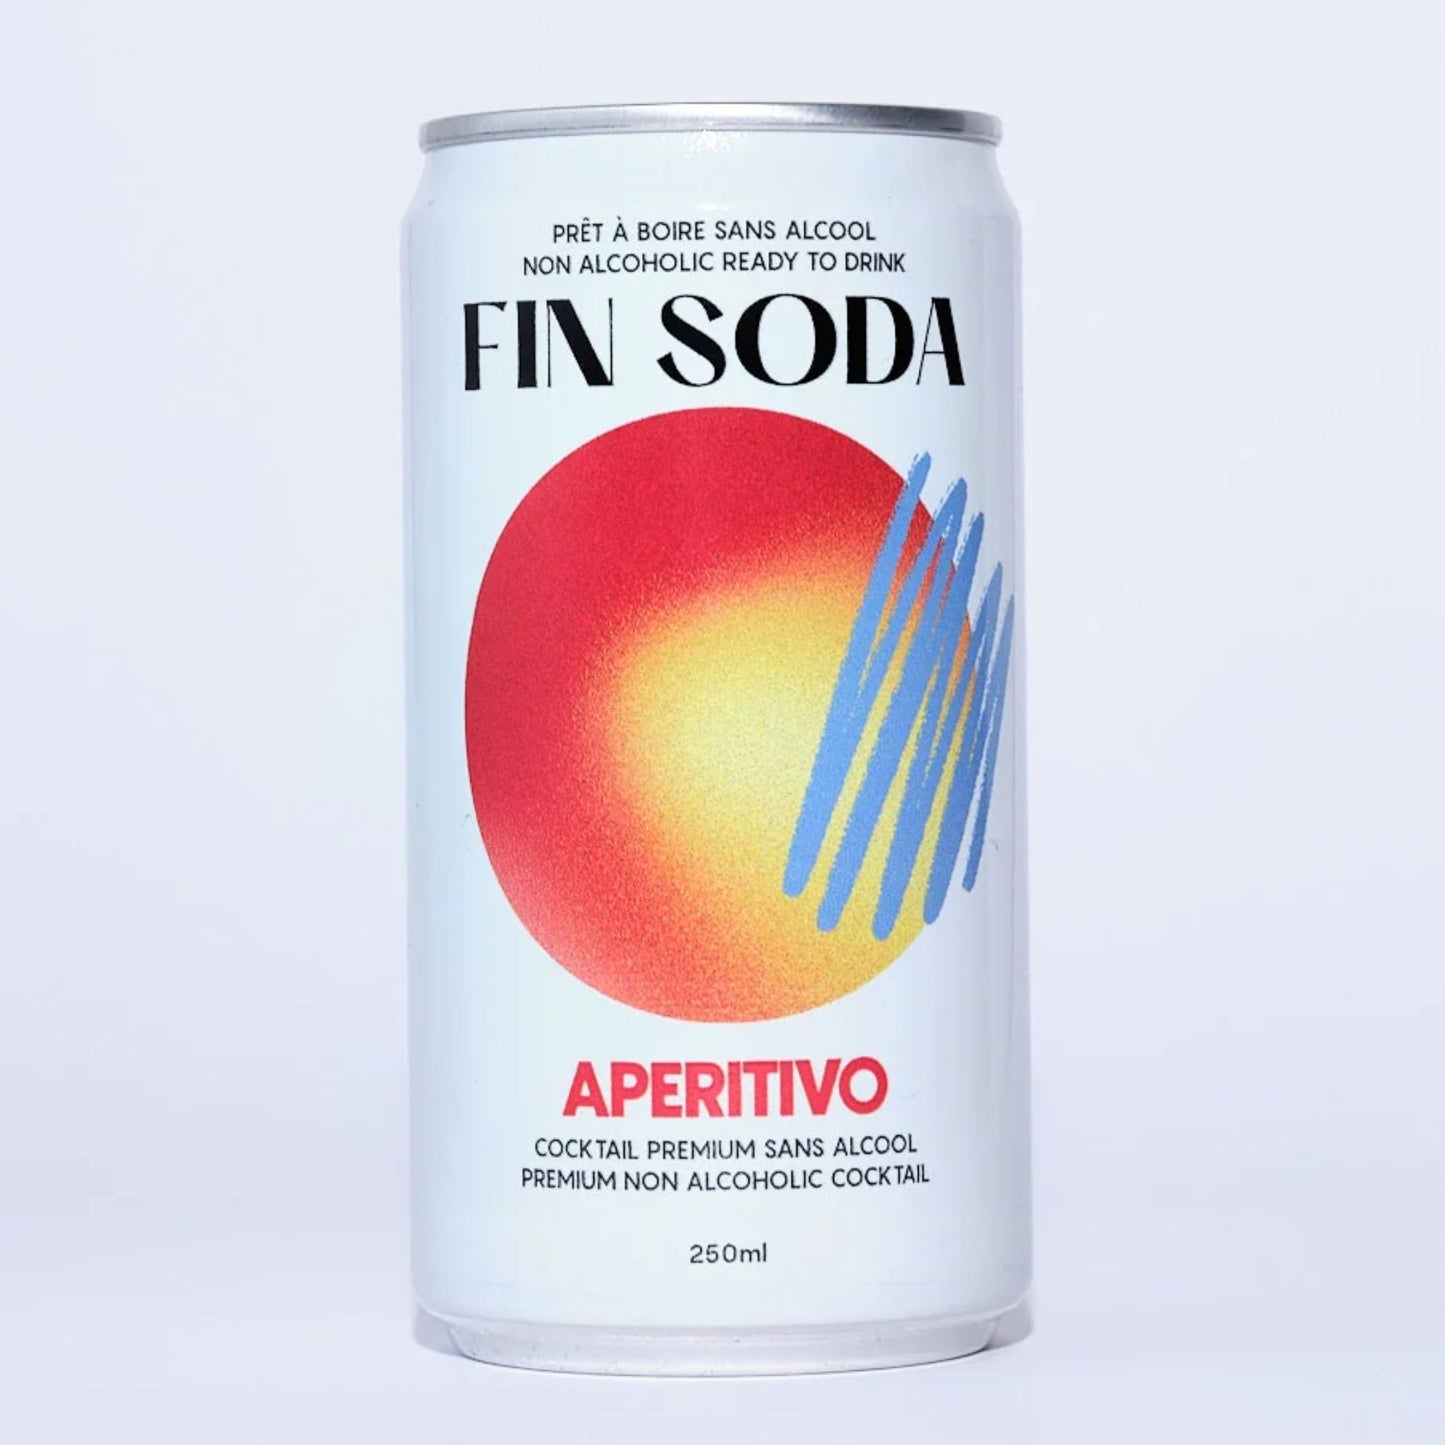 Fin Soda Non-Alcoholic Ready to Drink Aperitivo is available at Knyota Non-Alcoholic Drinks.